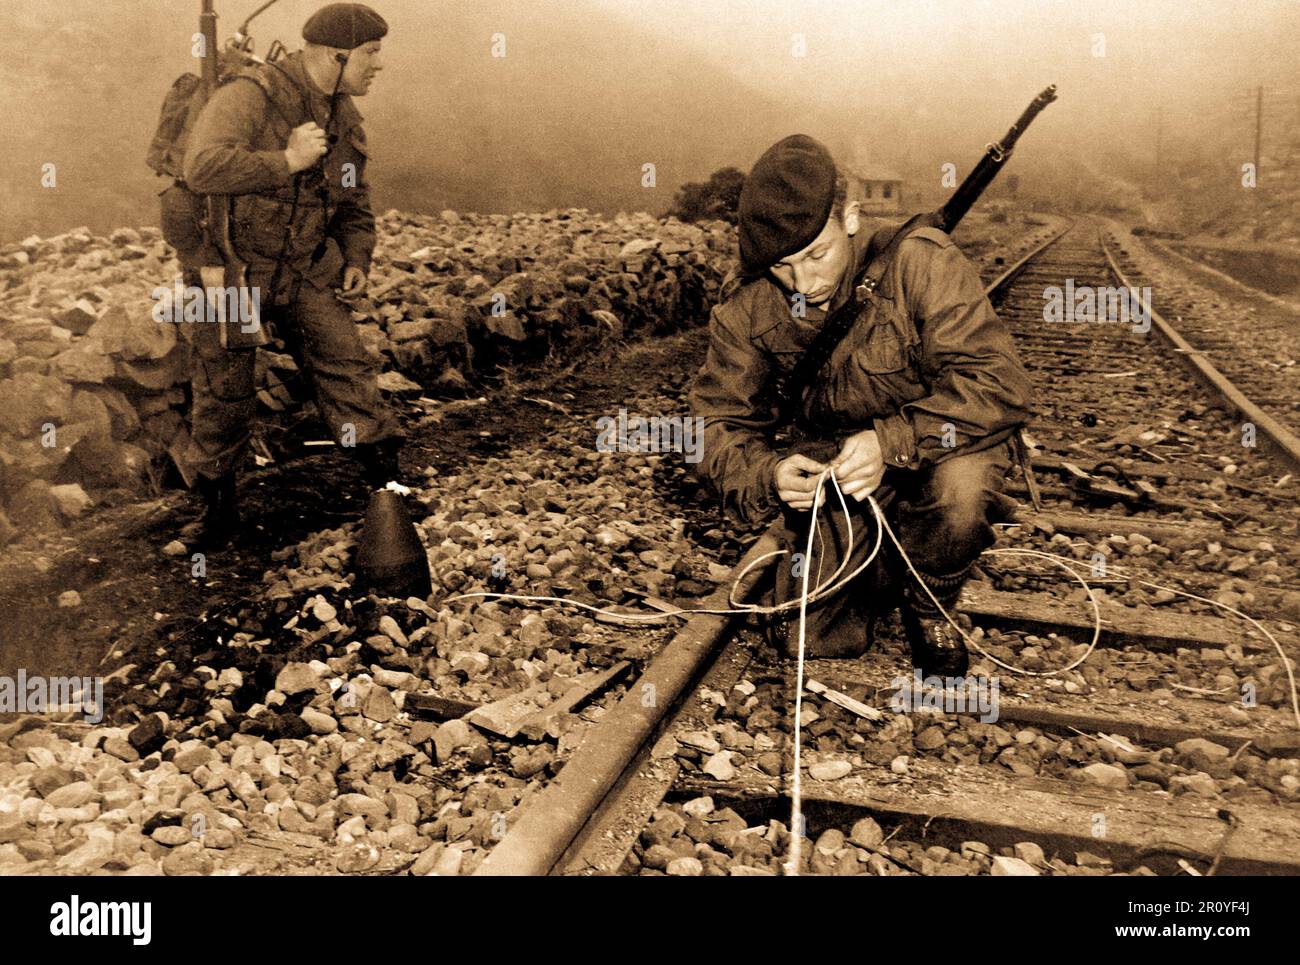 Commandoes of the 41st Royal British Marines plant demolition charges along railroad tracks of enemy supply line which they demolished during a commando raid, 8 miles south of Songjin, Korea.  April 10, 1951. Stock Photo